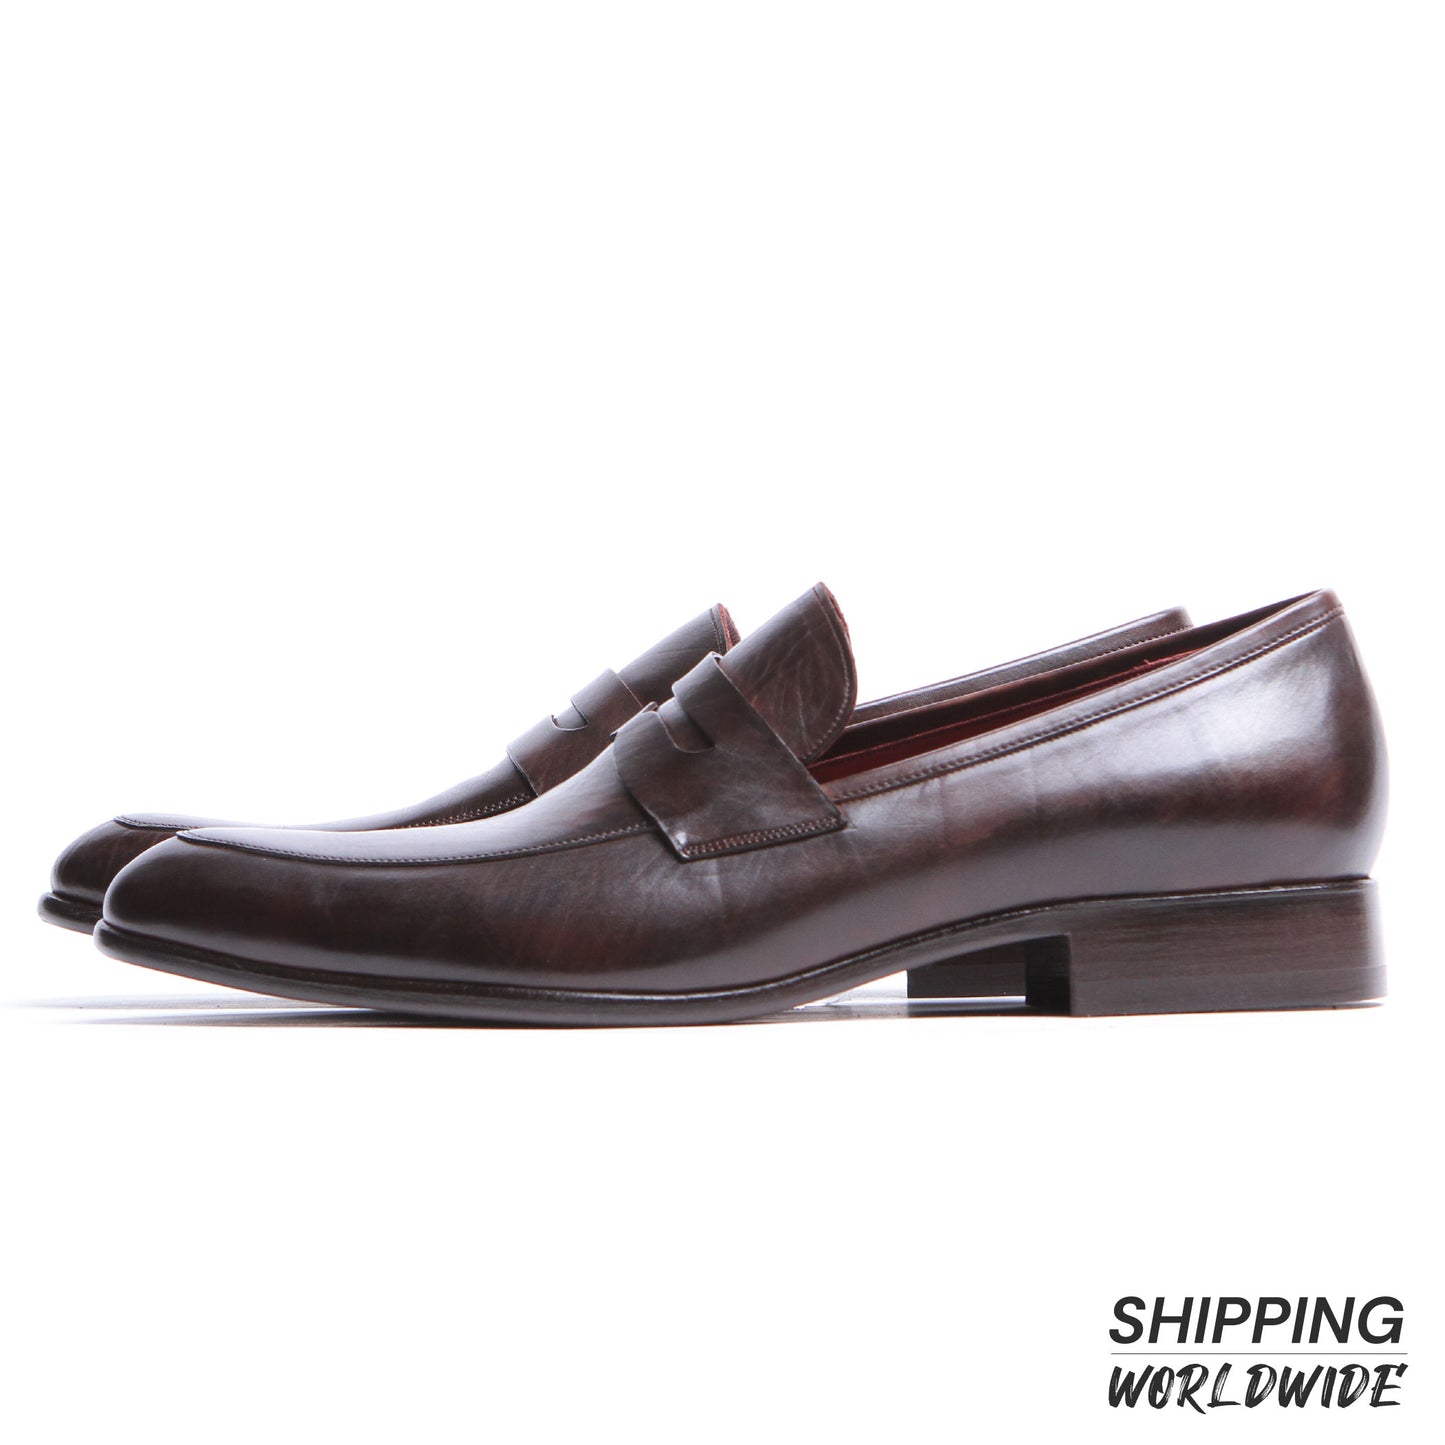 Masterpiece Penny Loafer - Brown (Calfskin)